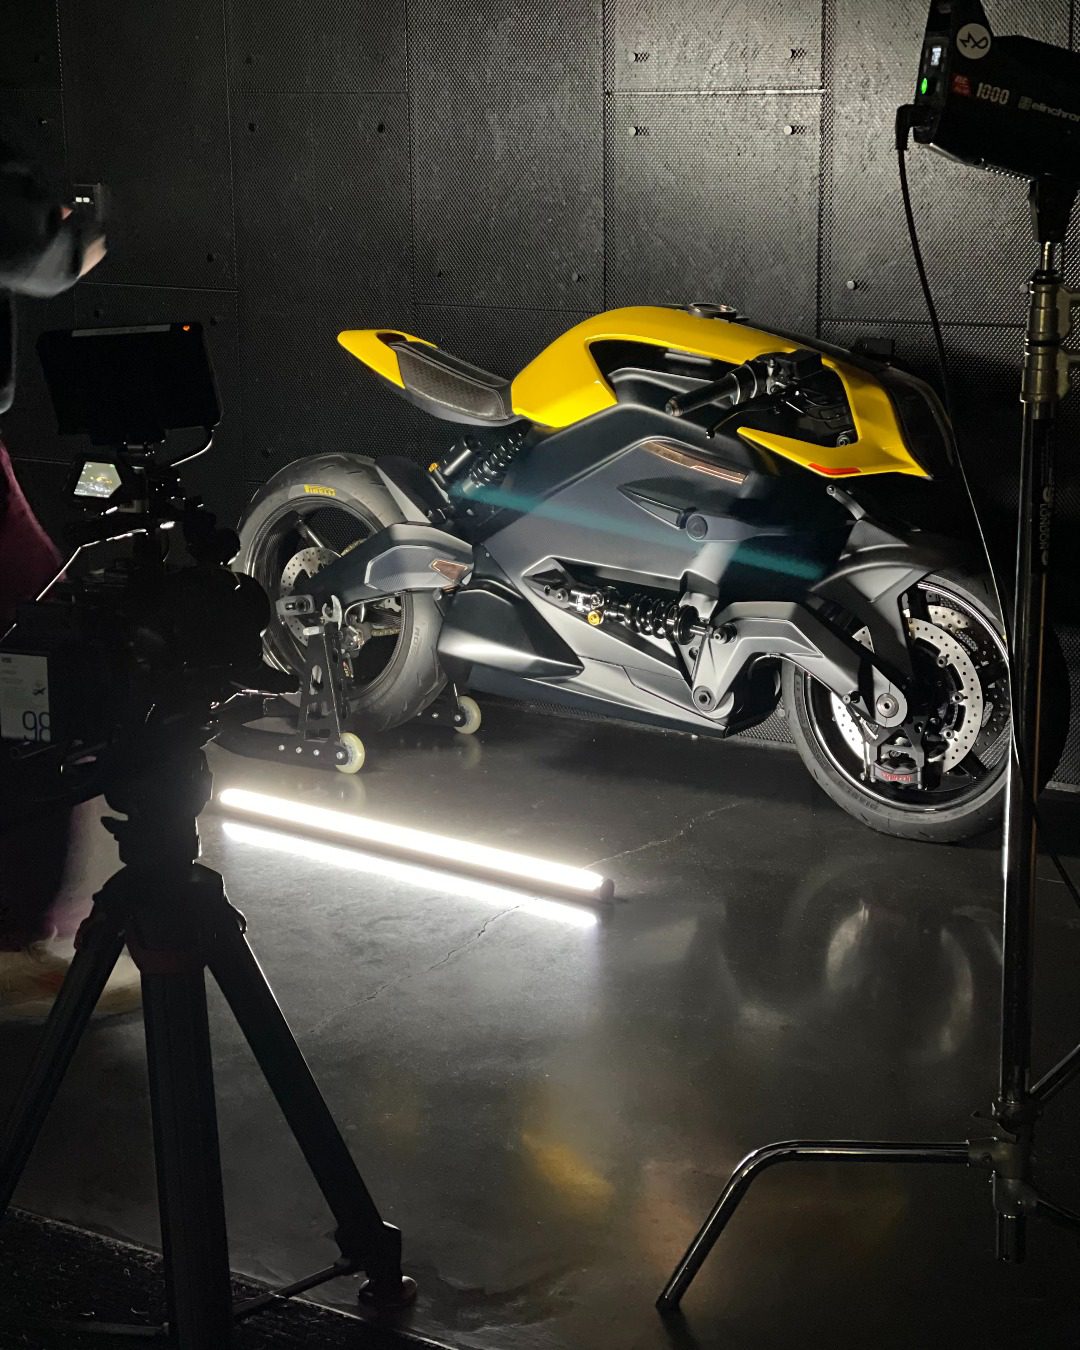 Arc's Vector- the world's most advanced motorcycle, featuring the all-new Angel Edition programme. All media sourced from Arc's Facebook page.